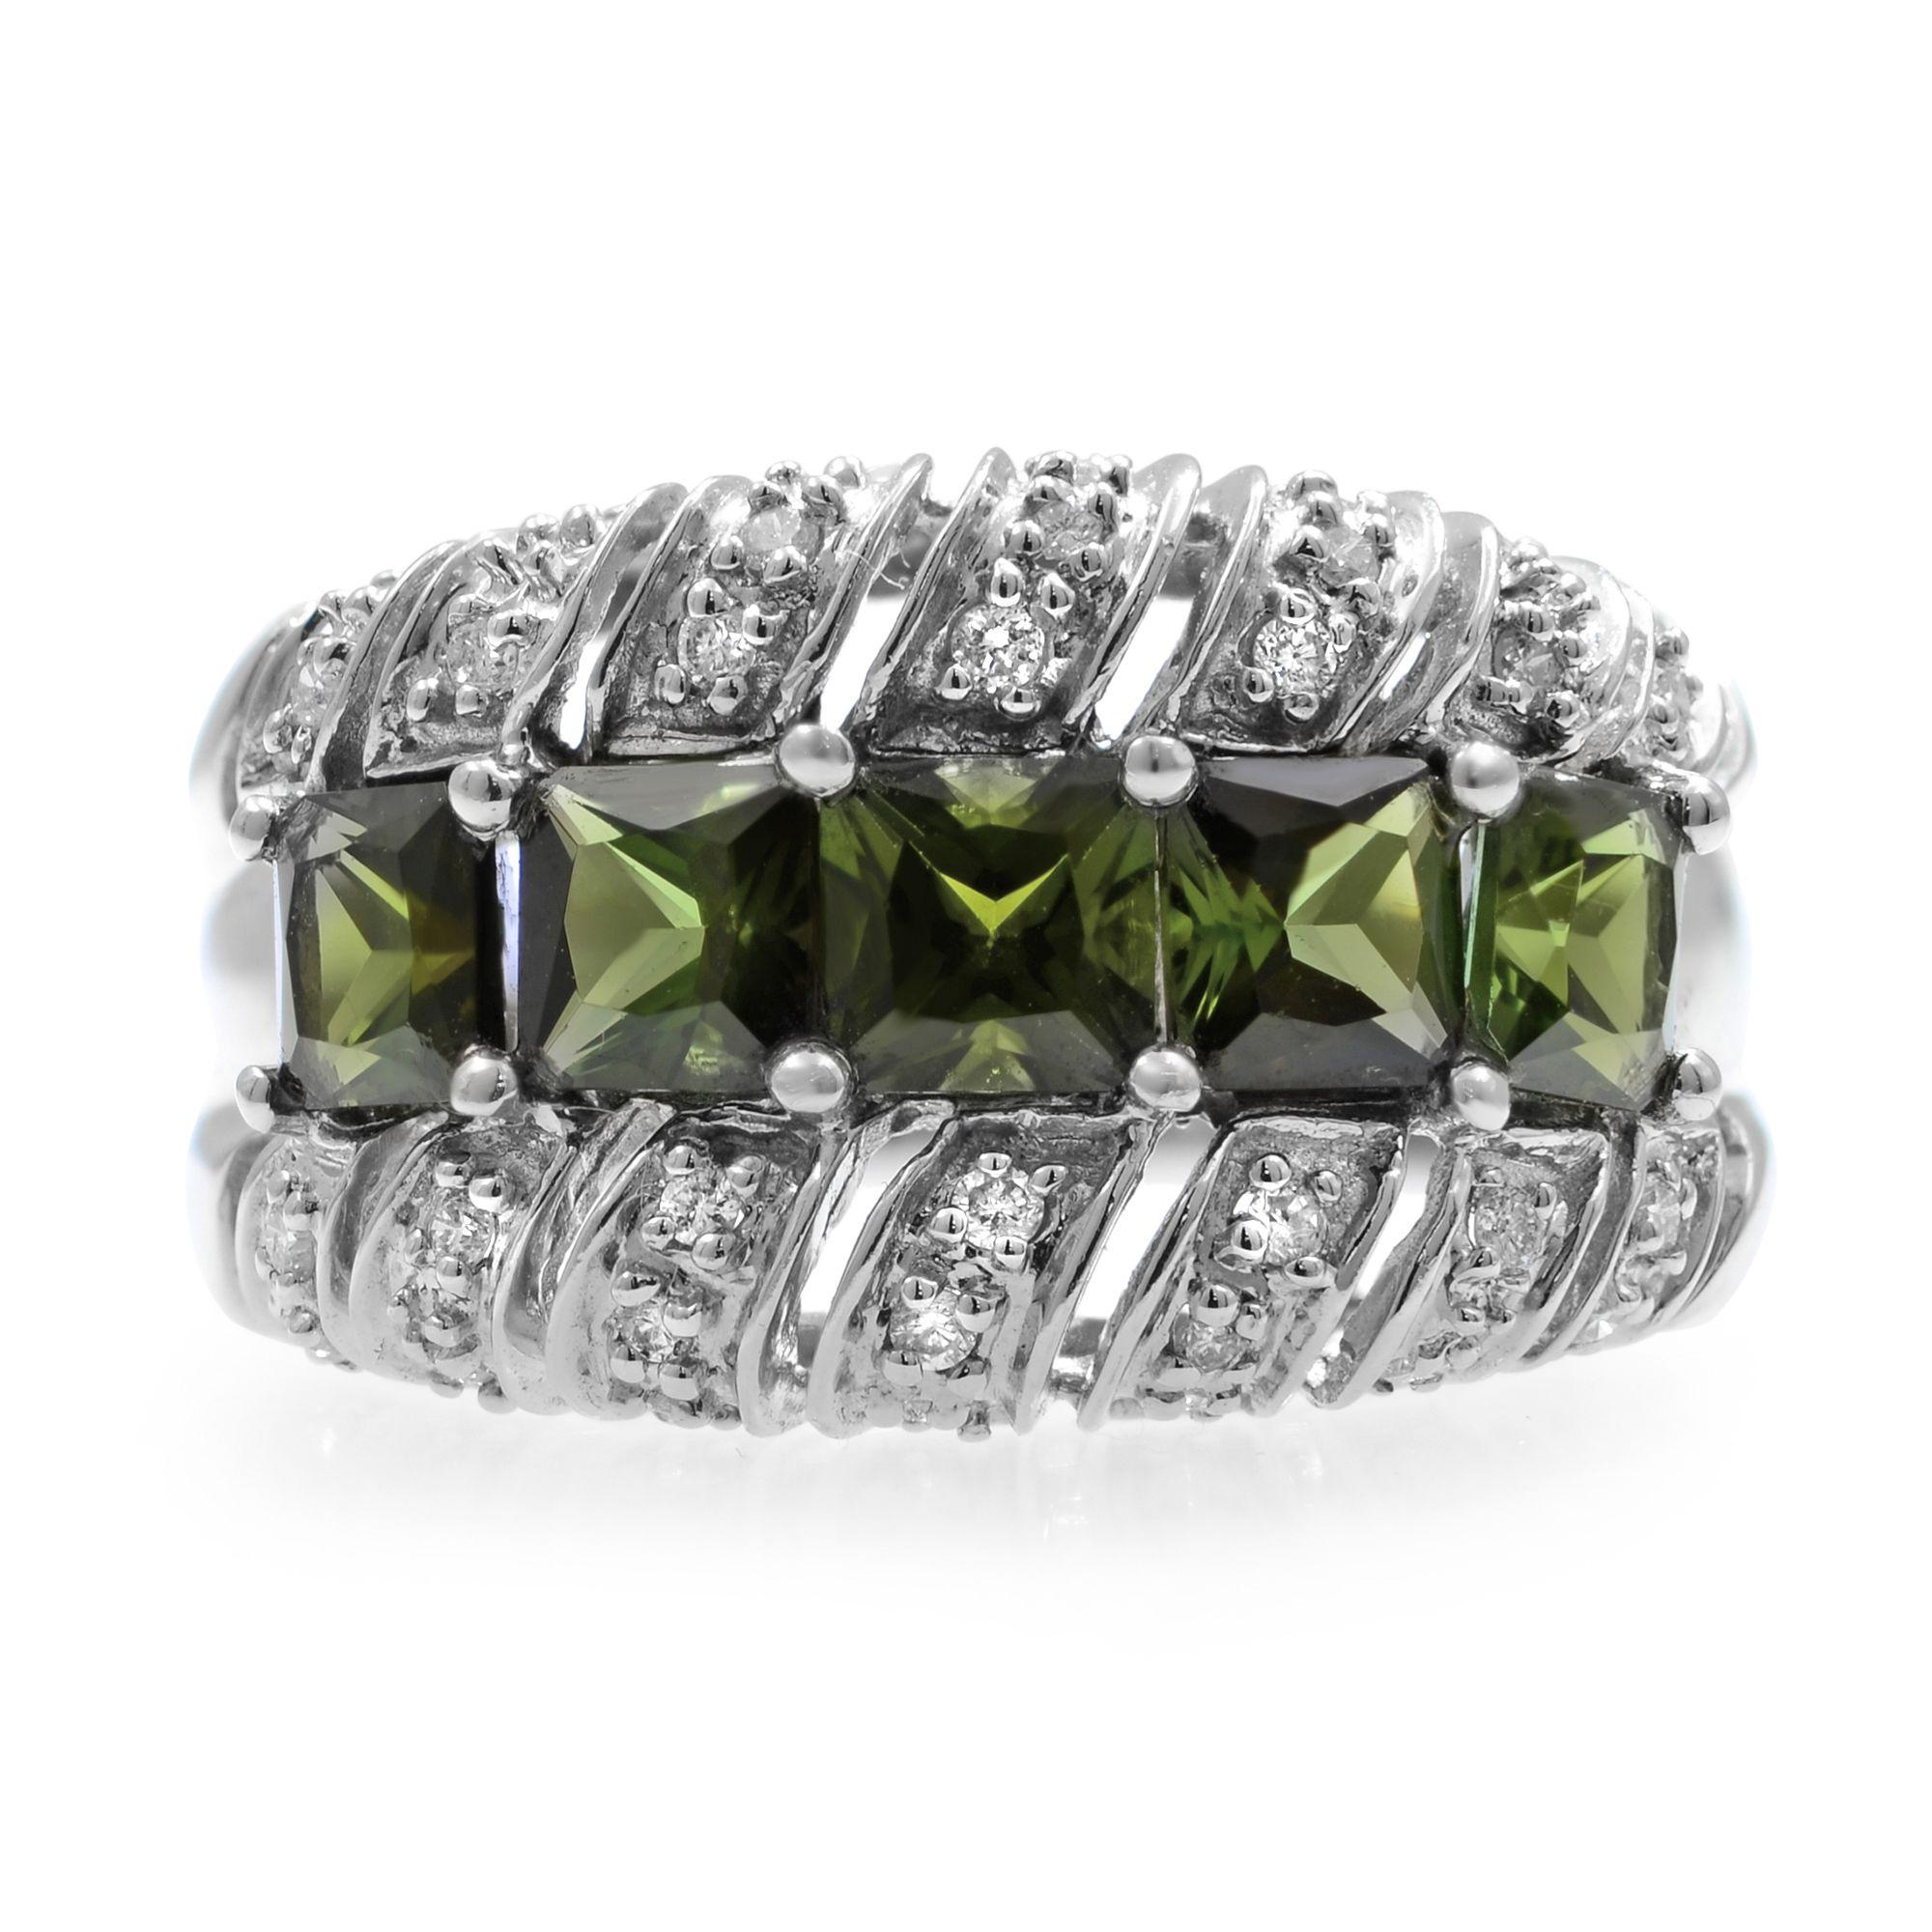 This unique Vintage ring features five beautiful green princess cut tourmalines accented by tiny round diamonds. Crafted of 14K white gold. Prong setting. The ring shines with a highly polished finish. Tourmalines total carat weight, 3.00. Diamond